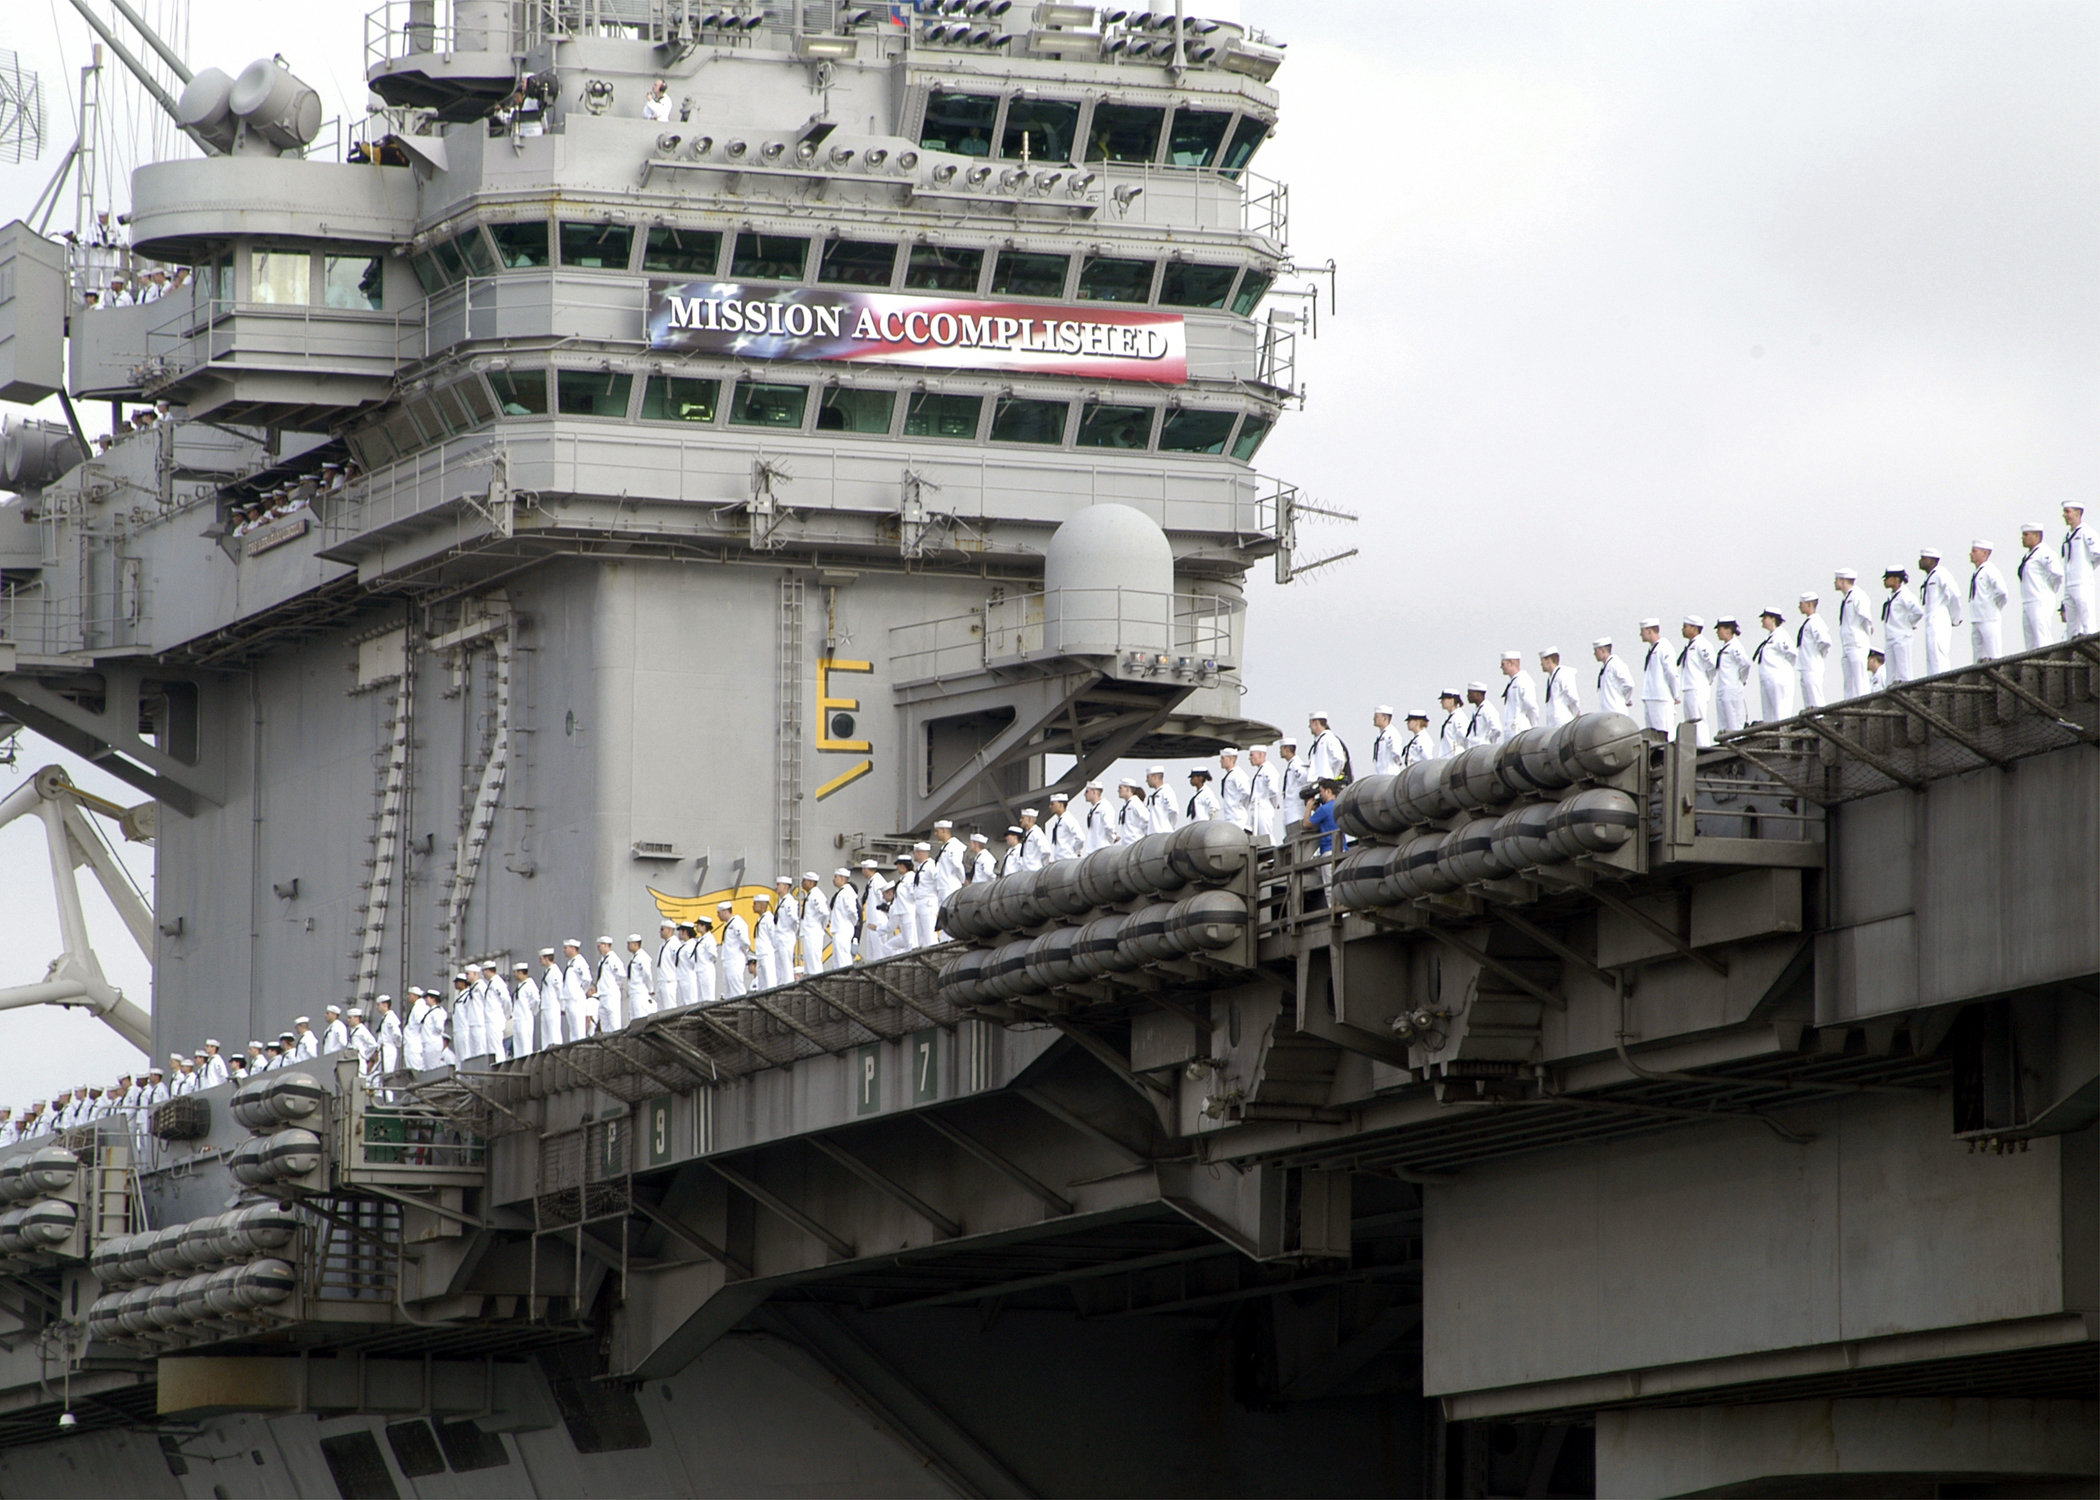 USS Abraham Lincoln mit Mission Accomplished Banner